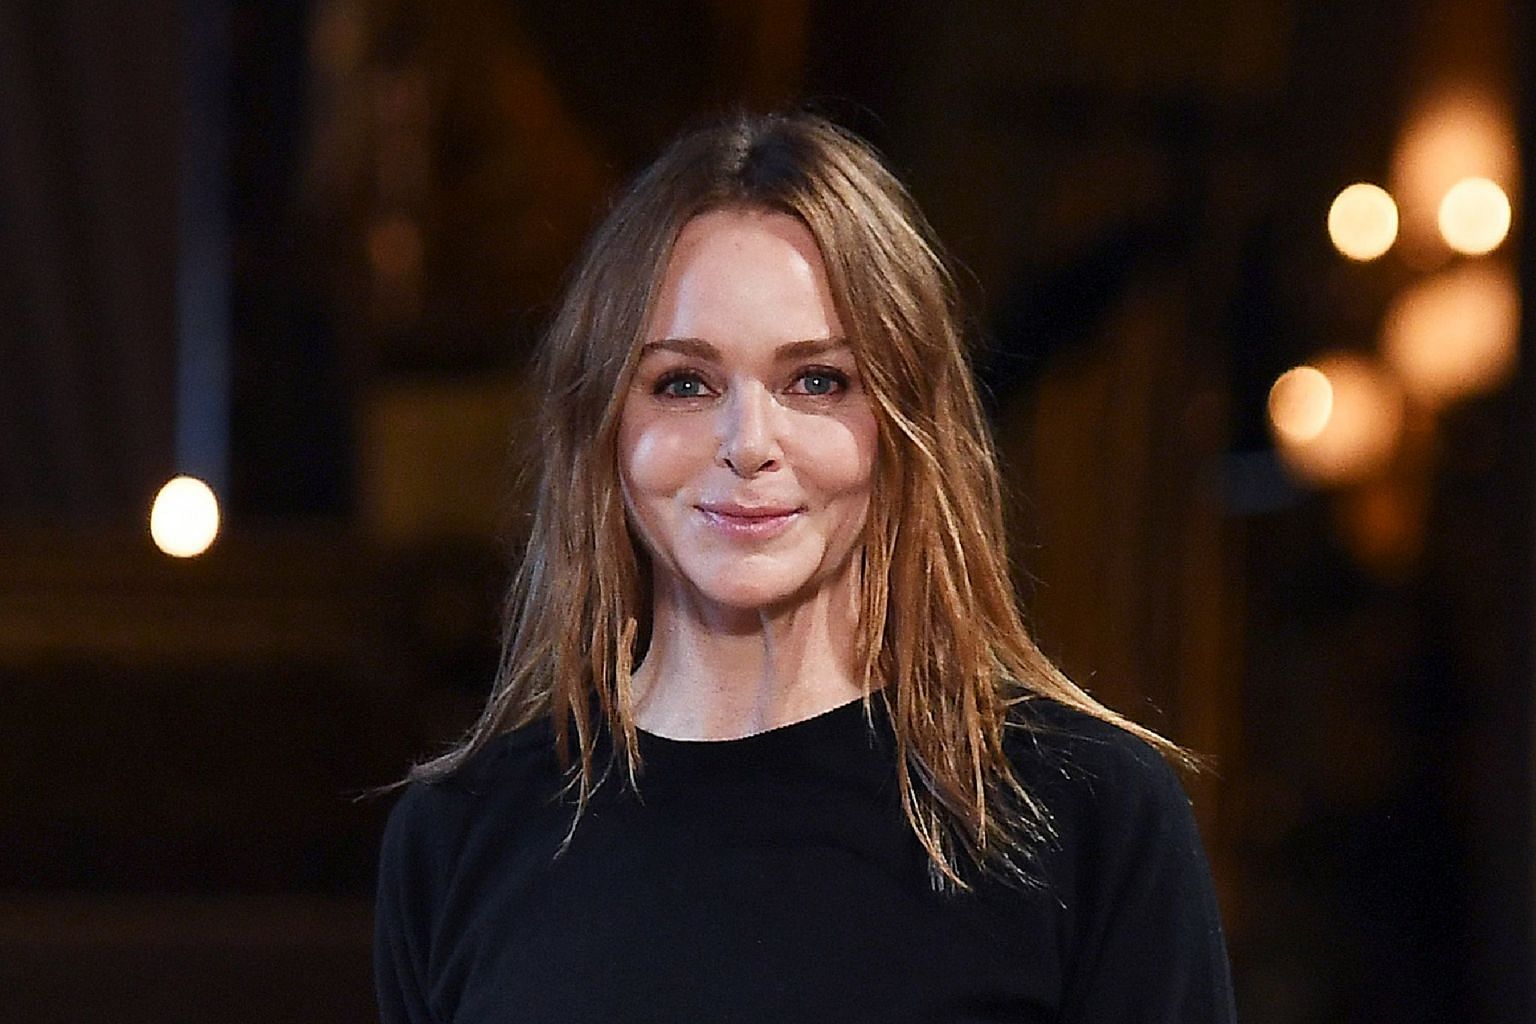 LVMH teams up with Stella McCartney, Lifestyle - THE BUSINESS TIMES